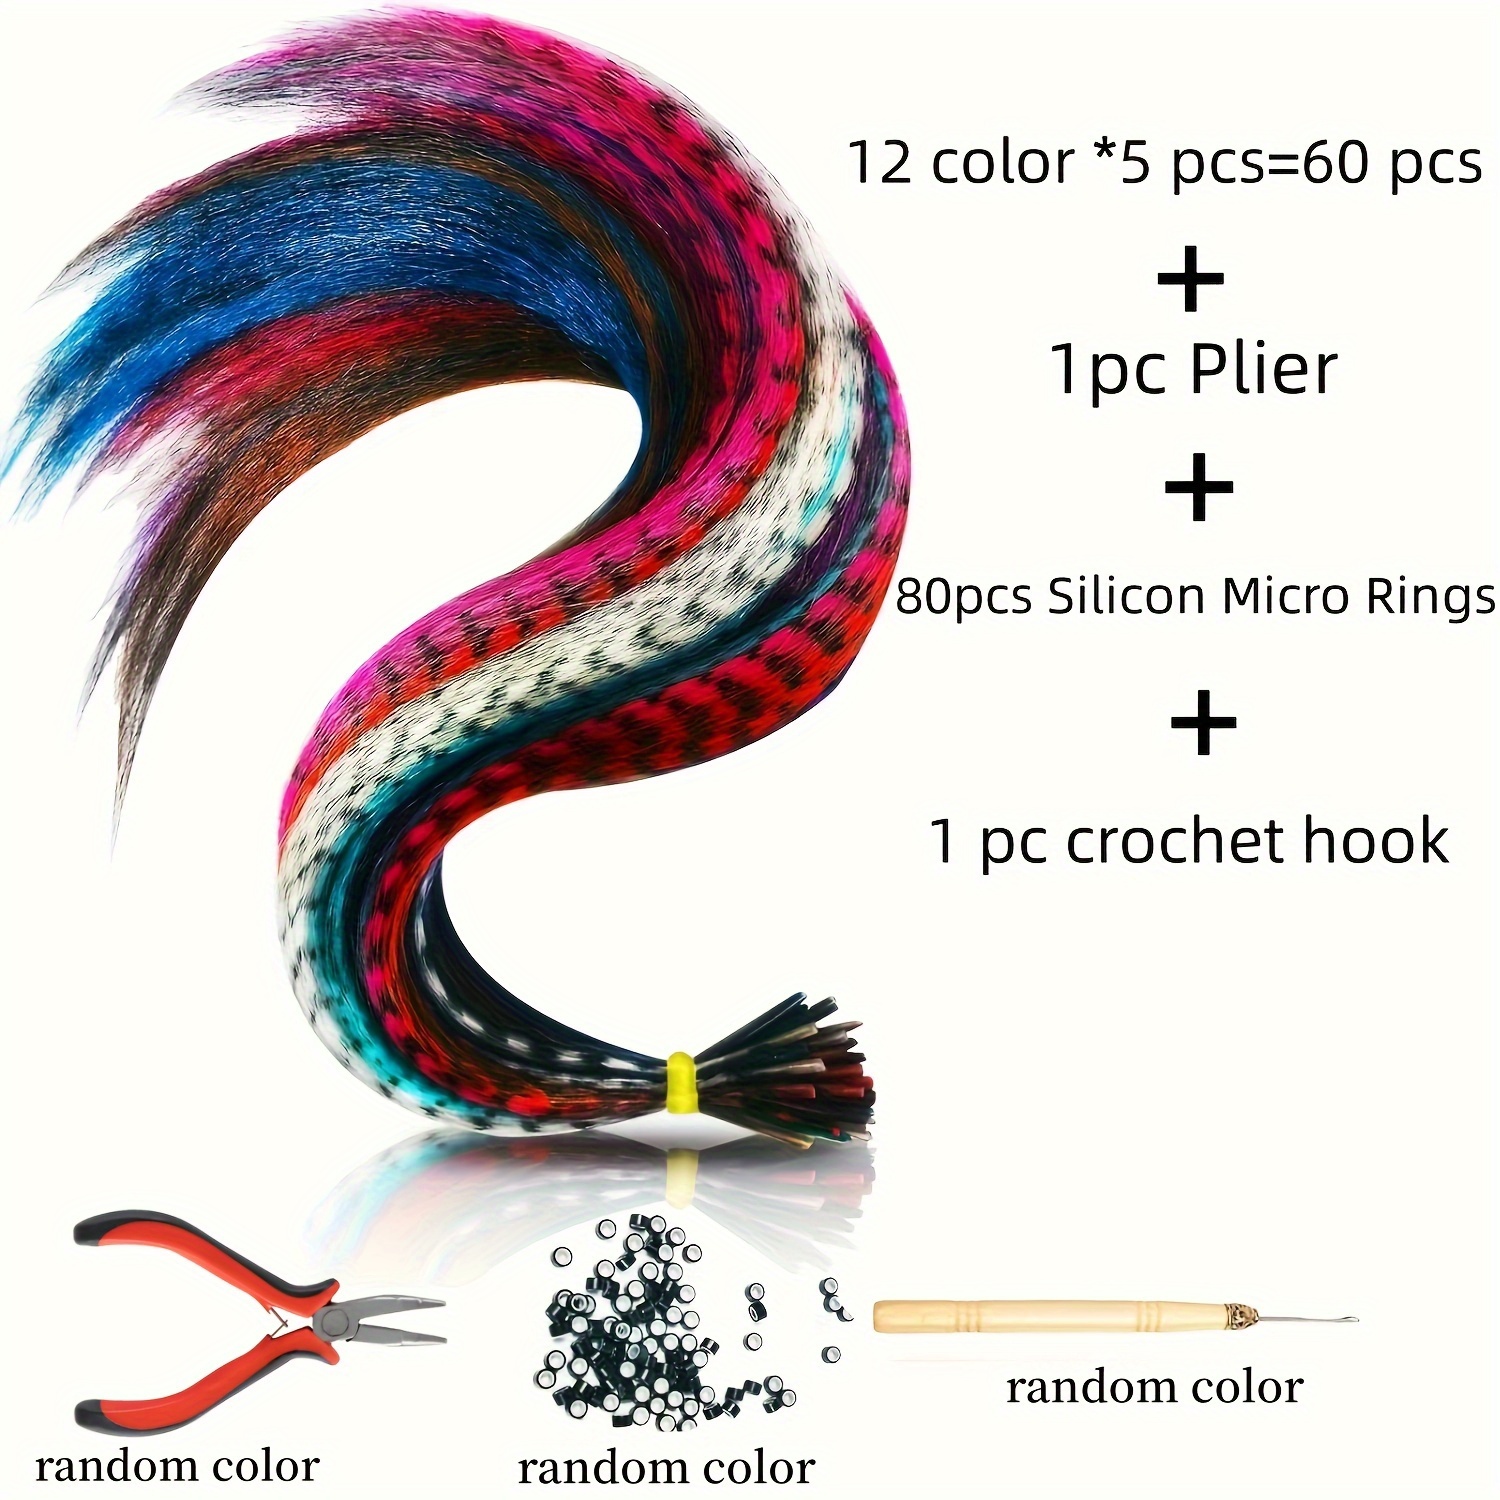 55pcs Synthetic Straight Multi-color Feathers Hairpiece Wig Hair Extension  Beauty Tool - Styling Accessories - AliExpress